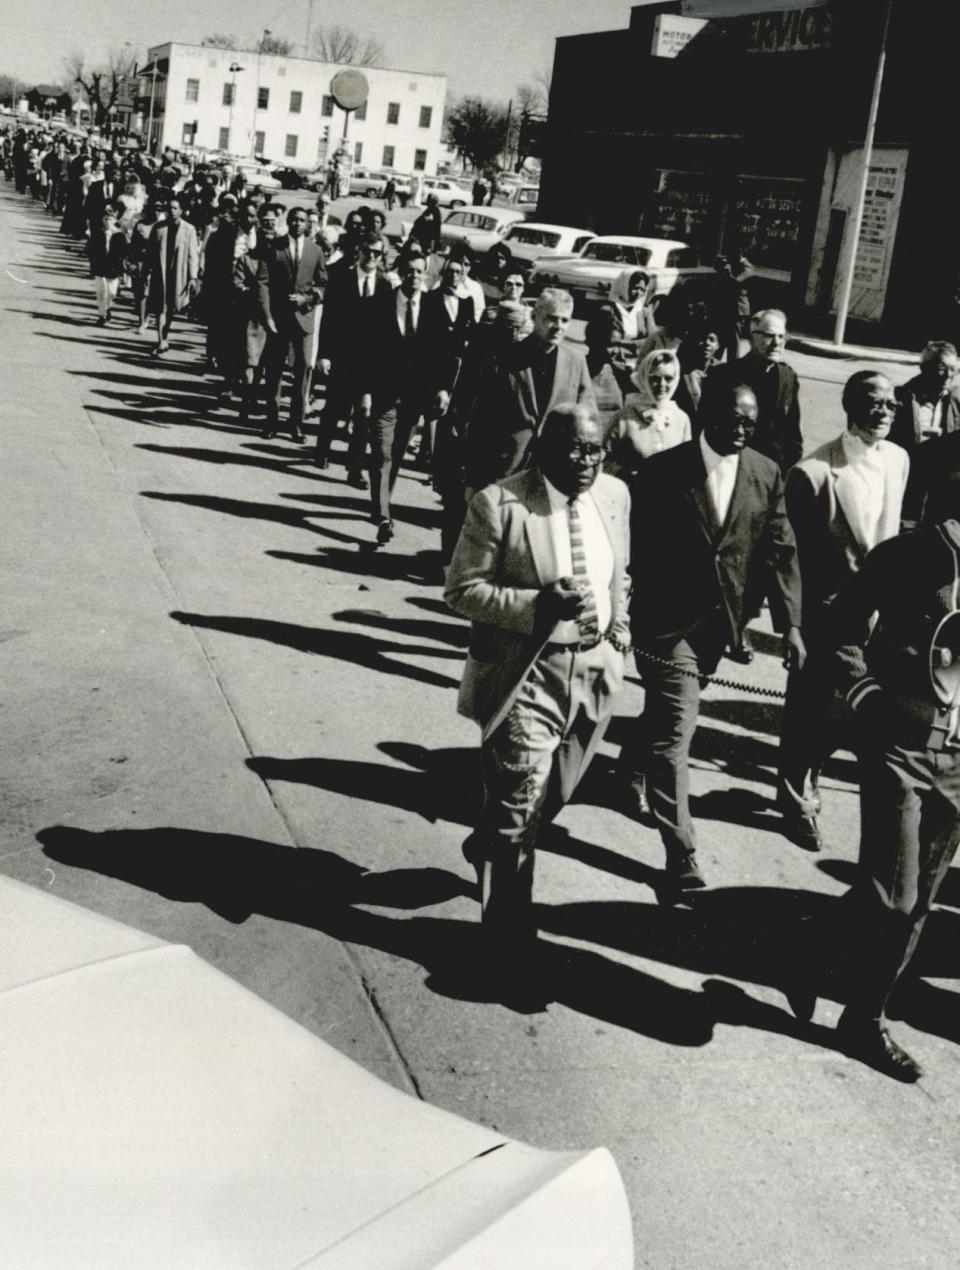 On April 6, 1968, Lawton minister N.H. Jones holds a microphone as he leads 300 people on a five-block march through Lawton to honor Martin Luther King Jr., who had been slain two days earlier in Memphis, Tenn.